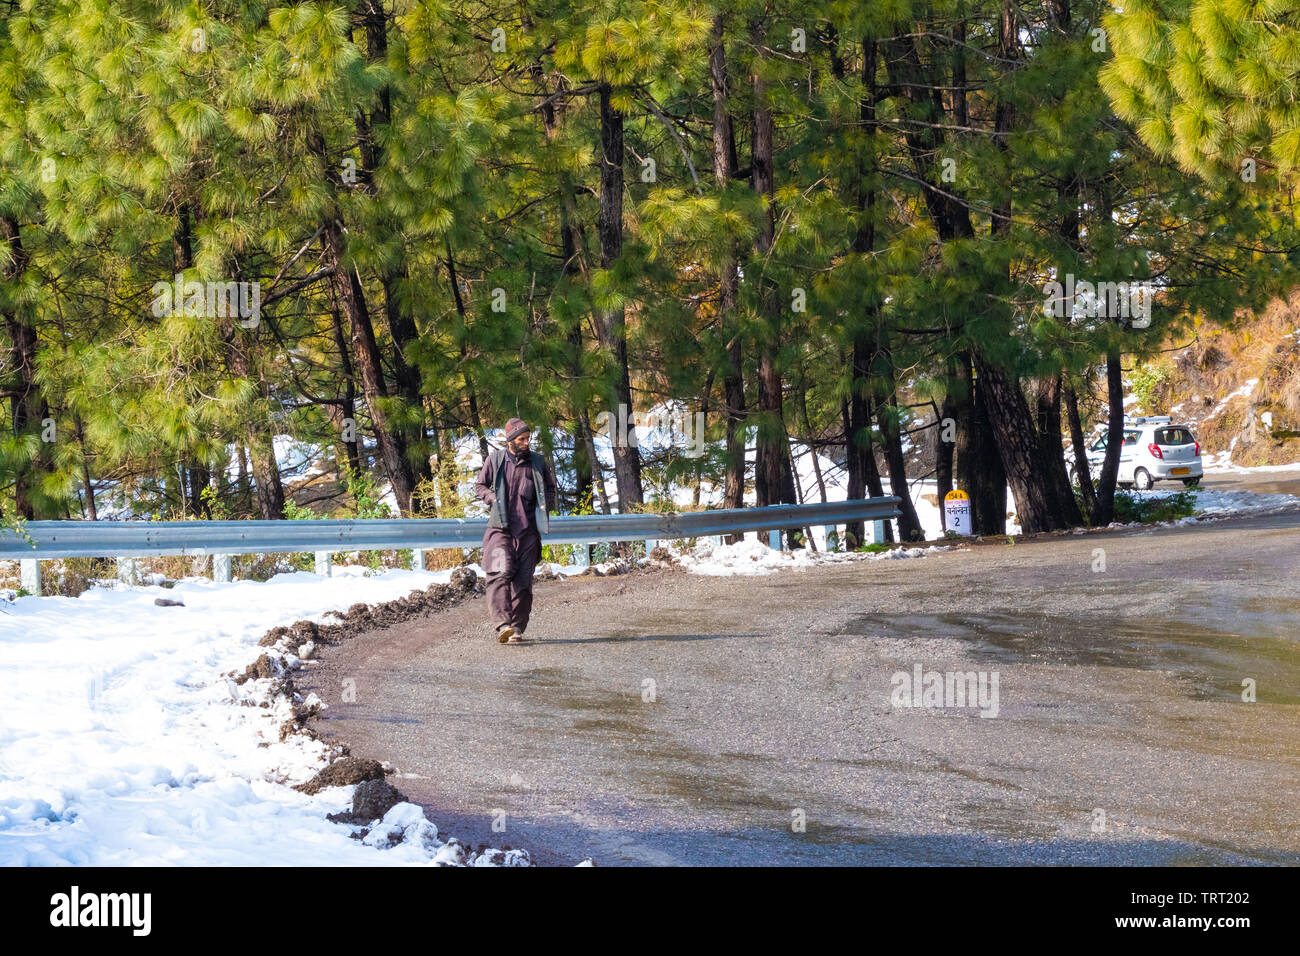 Banikhet, Dalhousie, Himachal Pradesh, India - January 2019. After consequences of heavy snowfall, local person walk on the road. Stock Photo